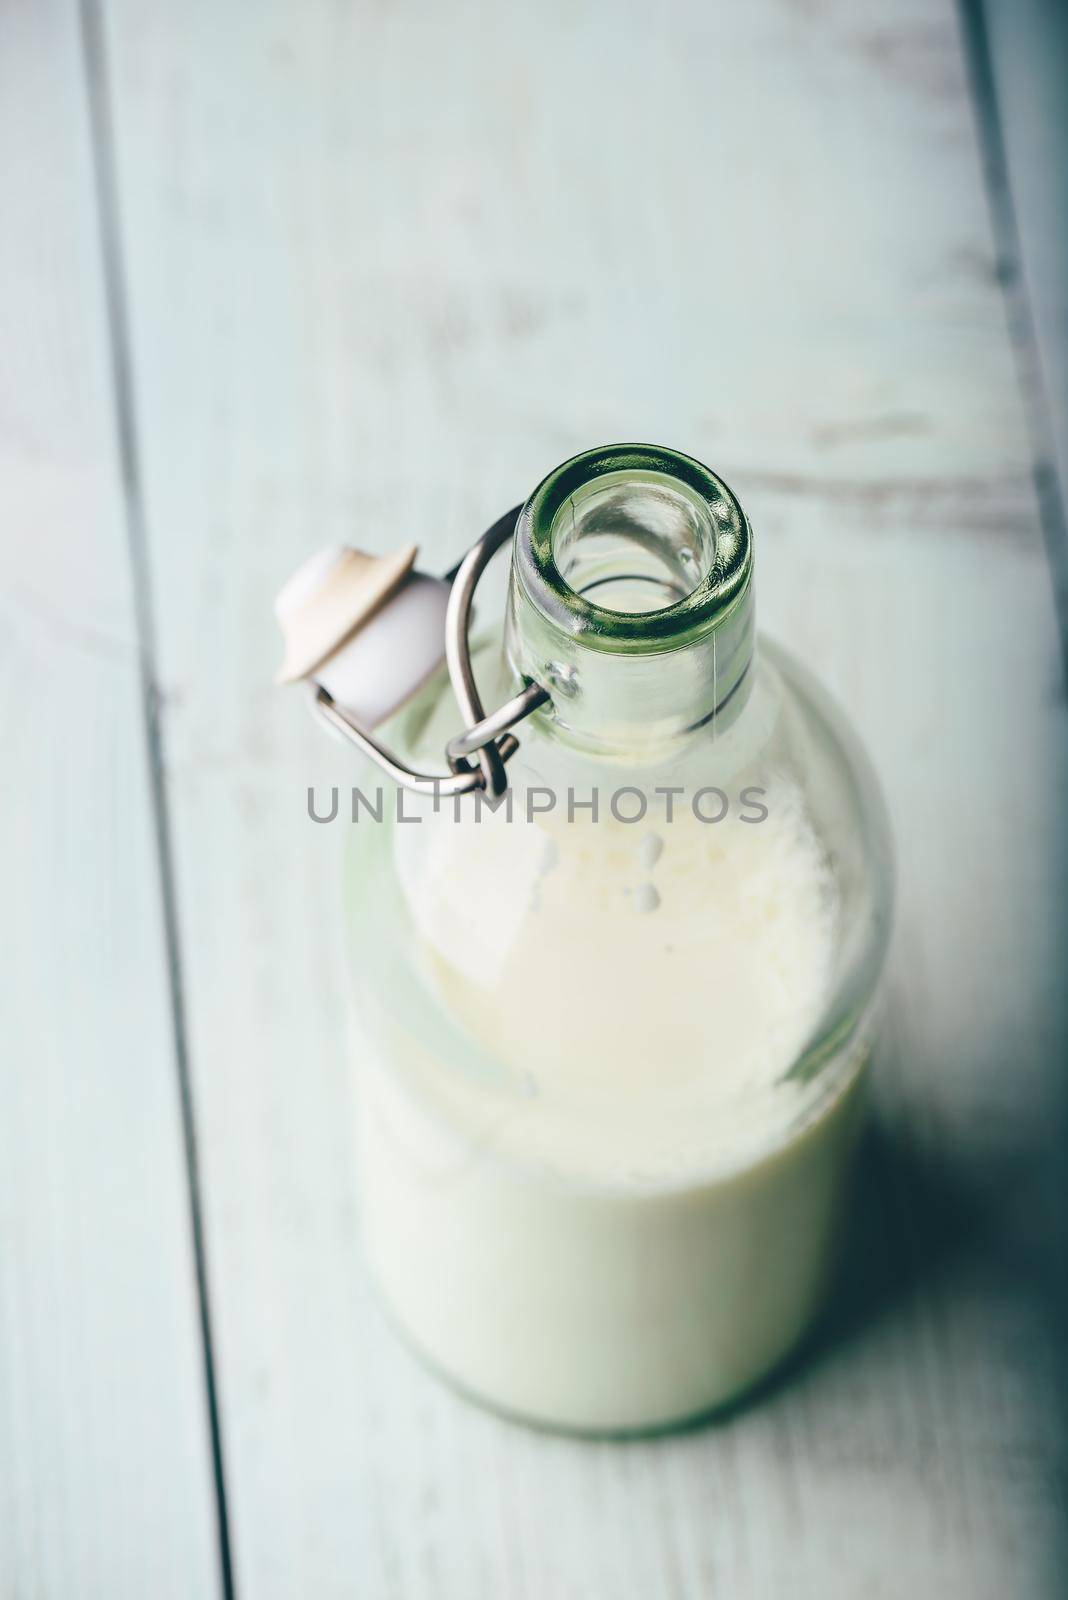 Milk in glass bottle on wooden surface. High angle view